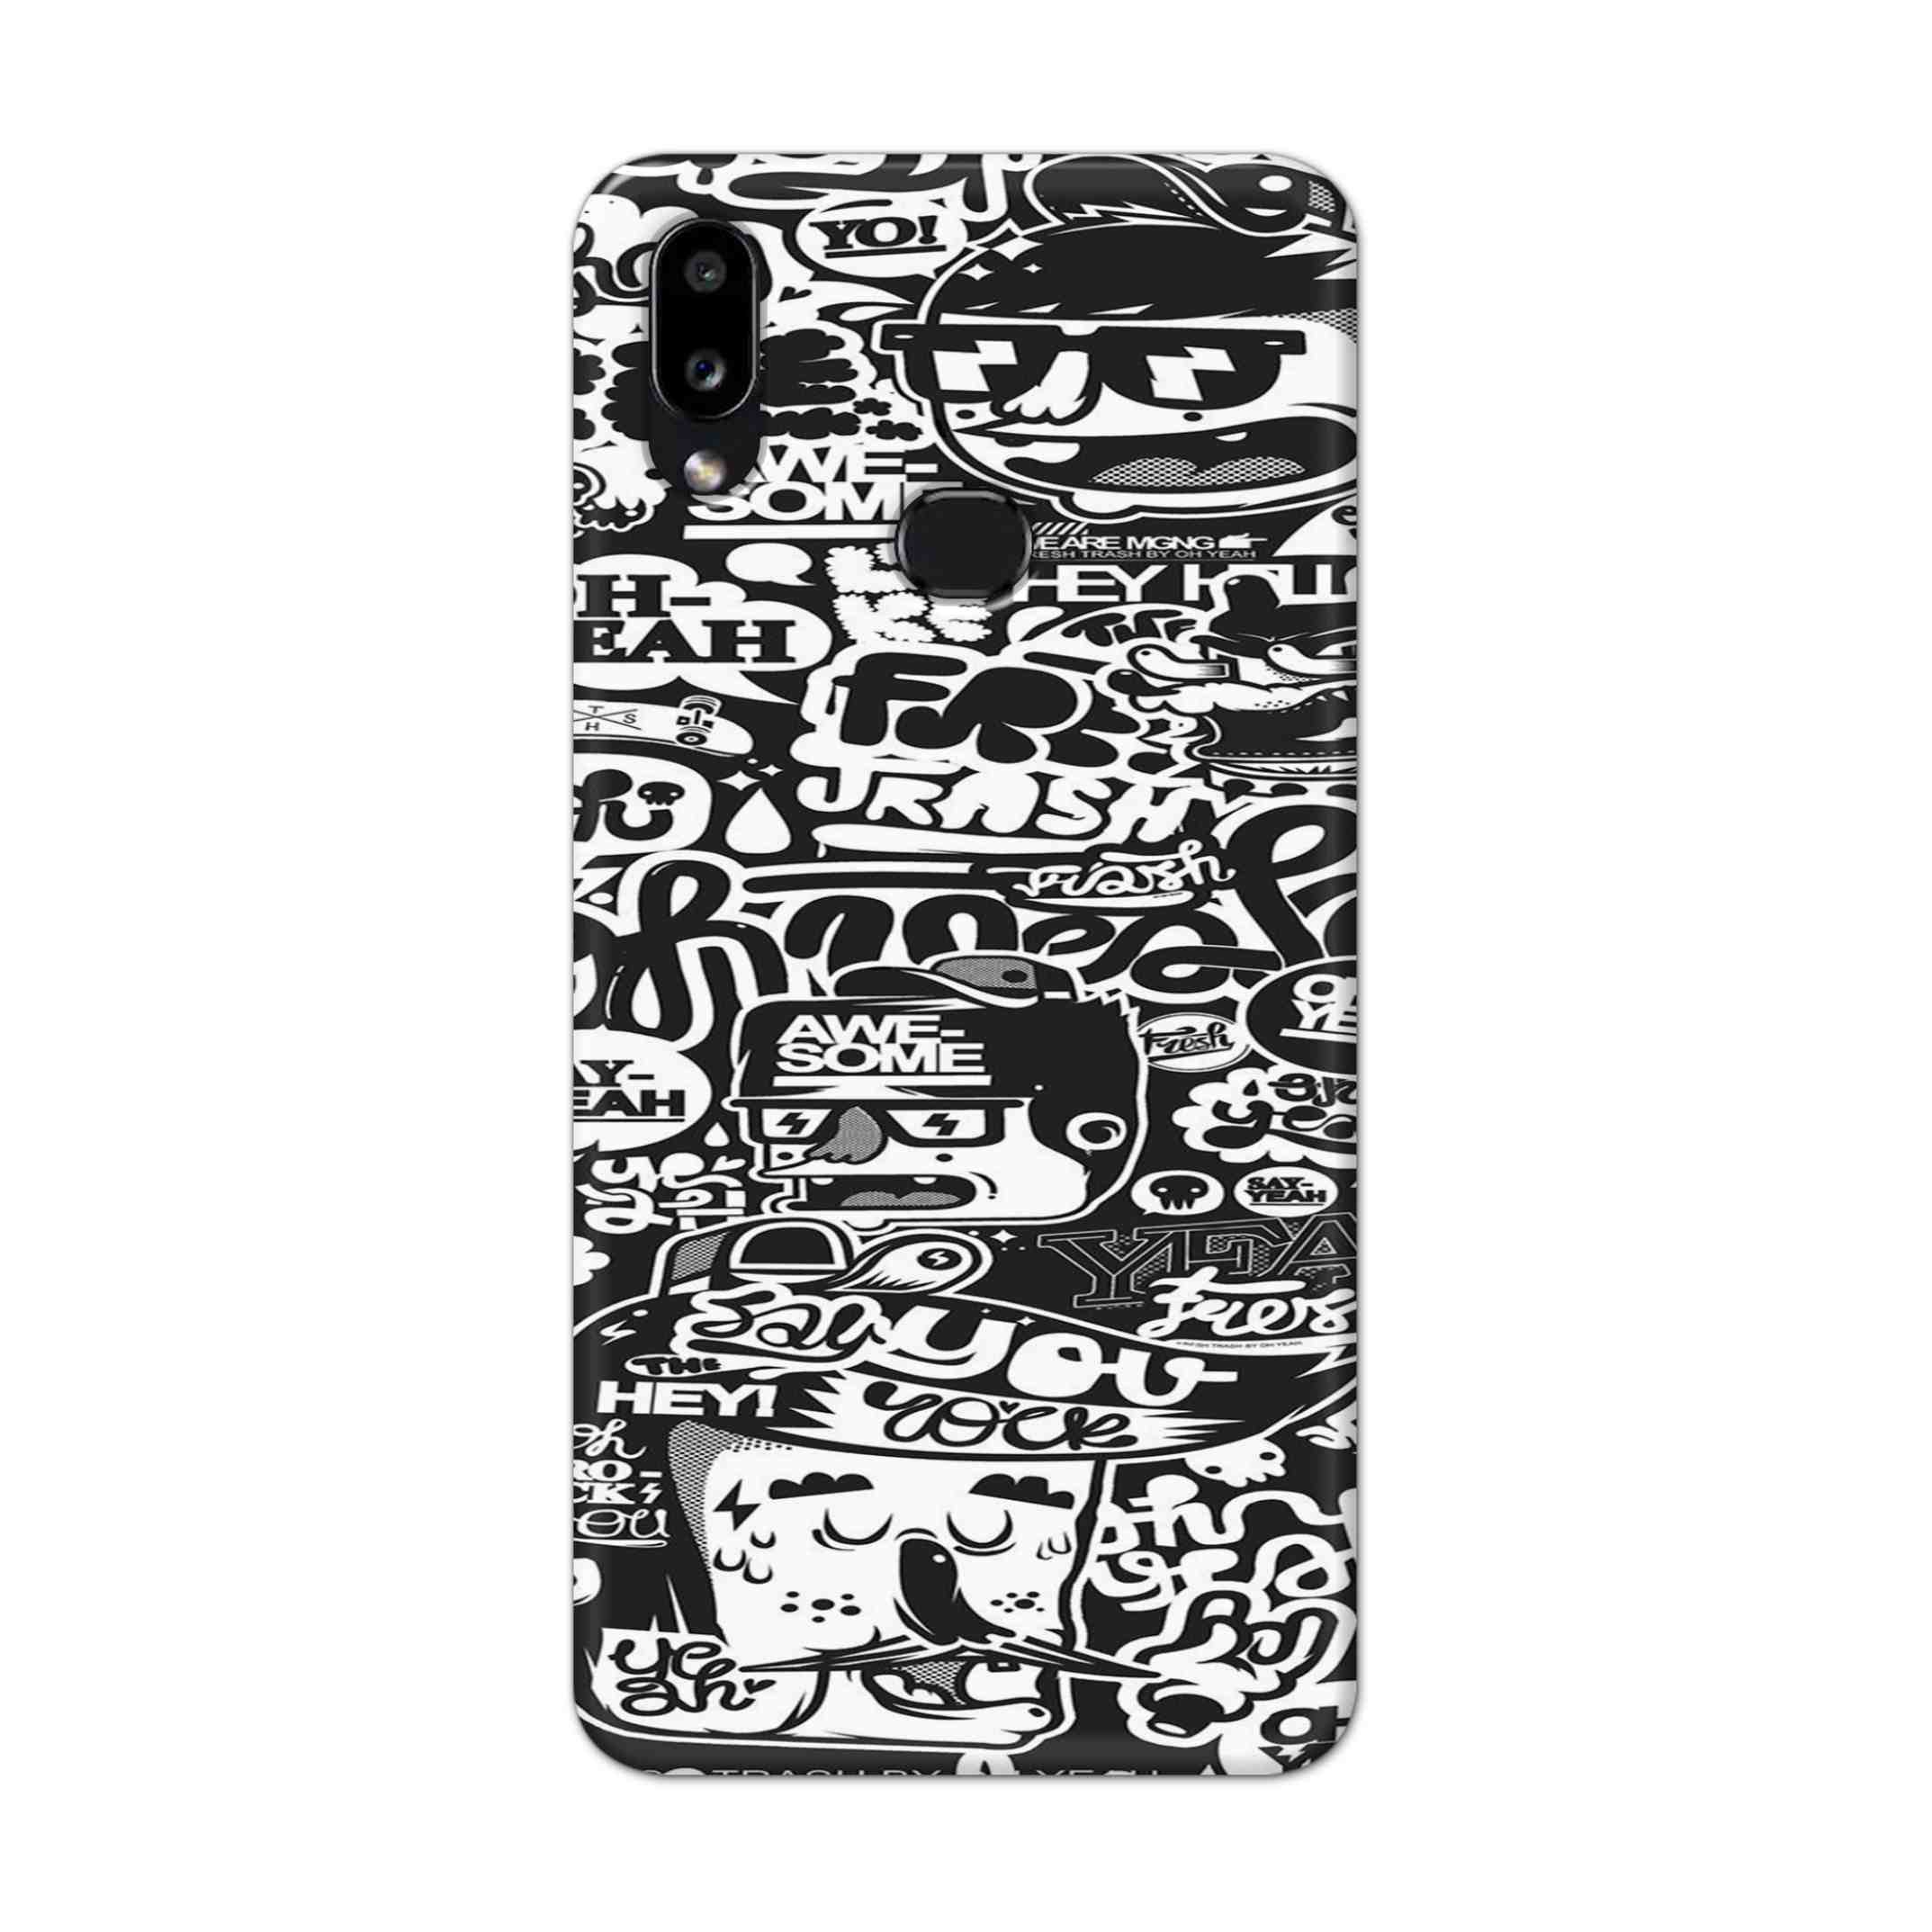 Buy Awesome Hard Back Mobile Phone Case Cover For Samsung Galaxy M01s Online